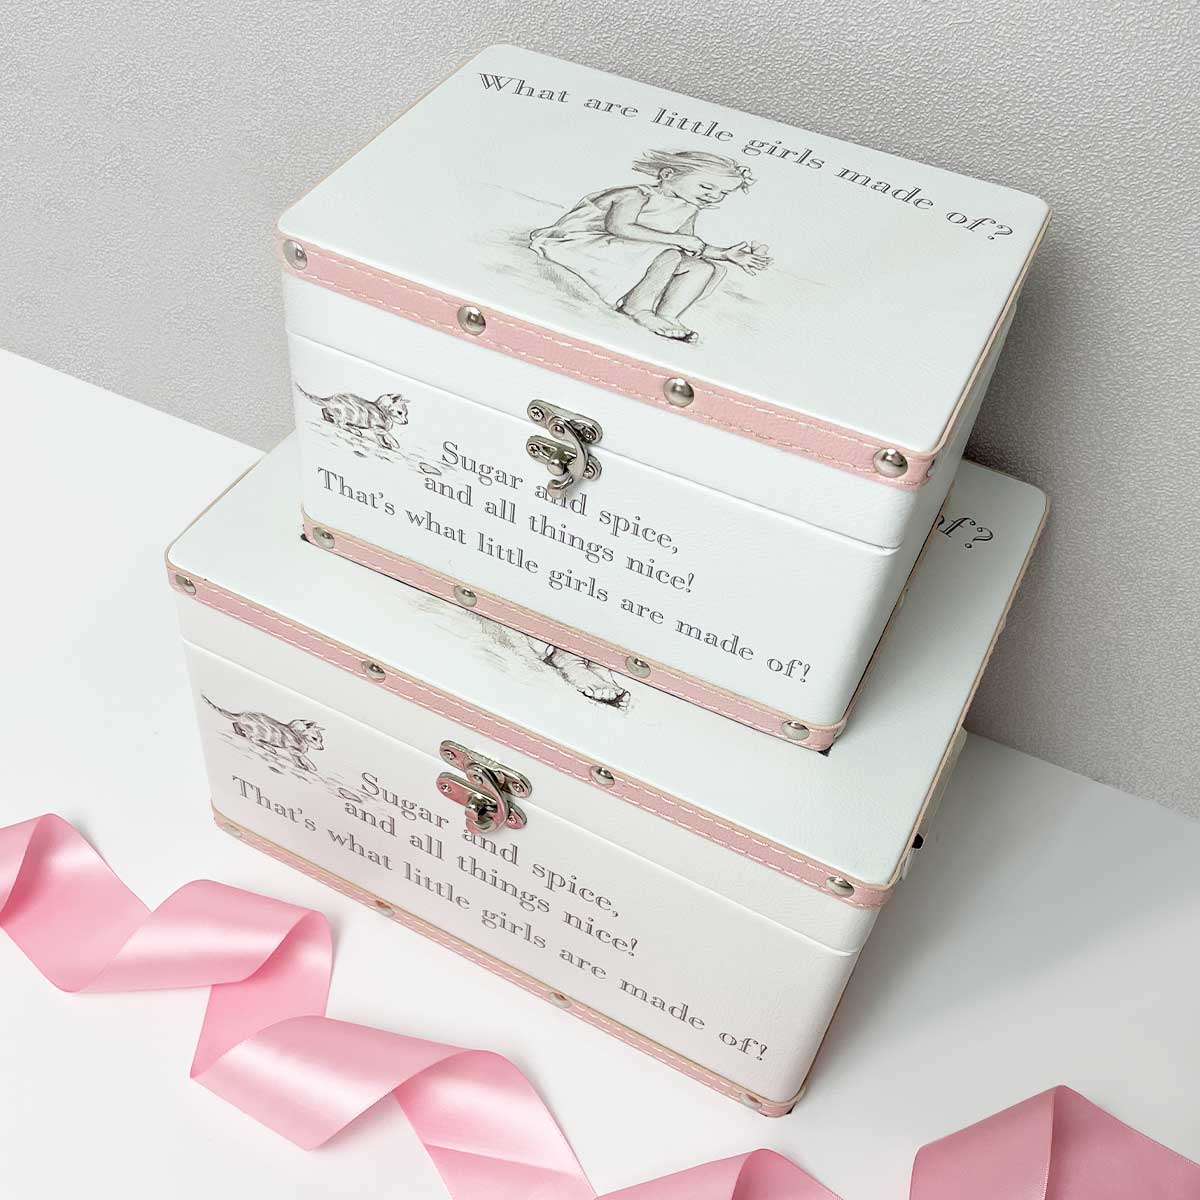 2 Keepsake Boxes, 'What are little girls made of?'